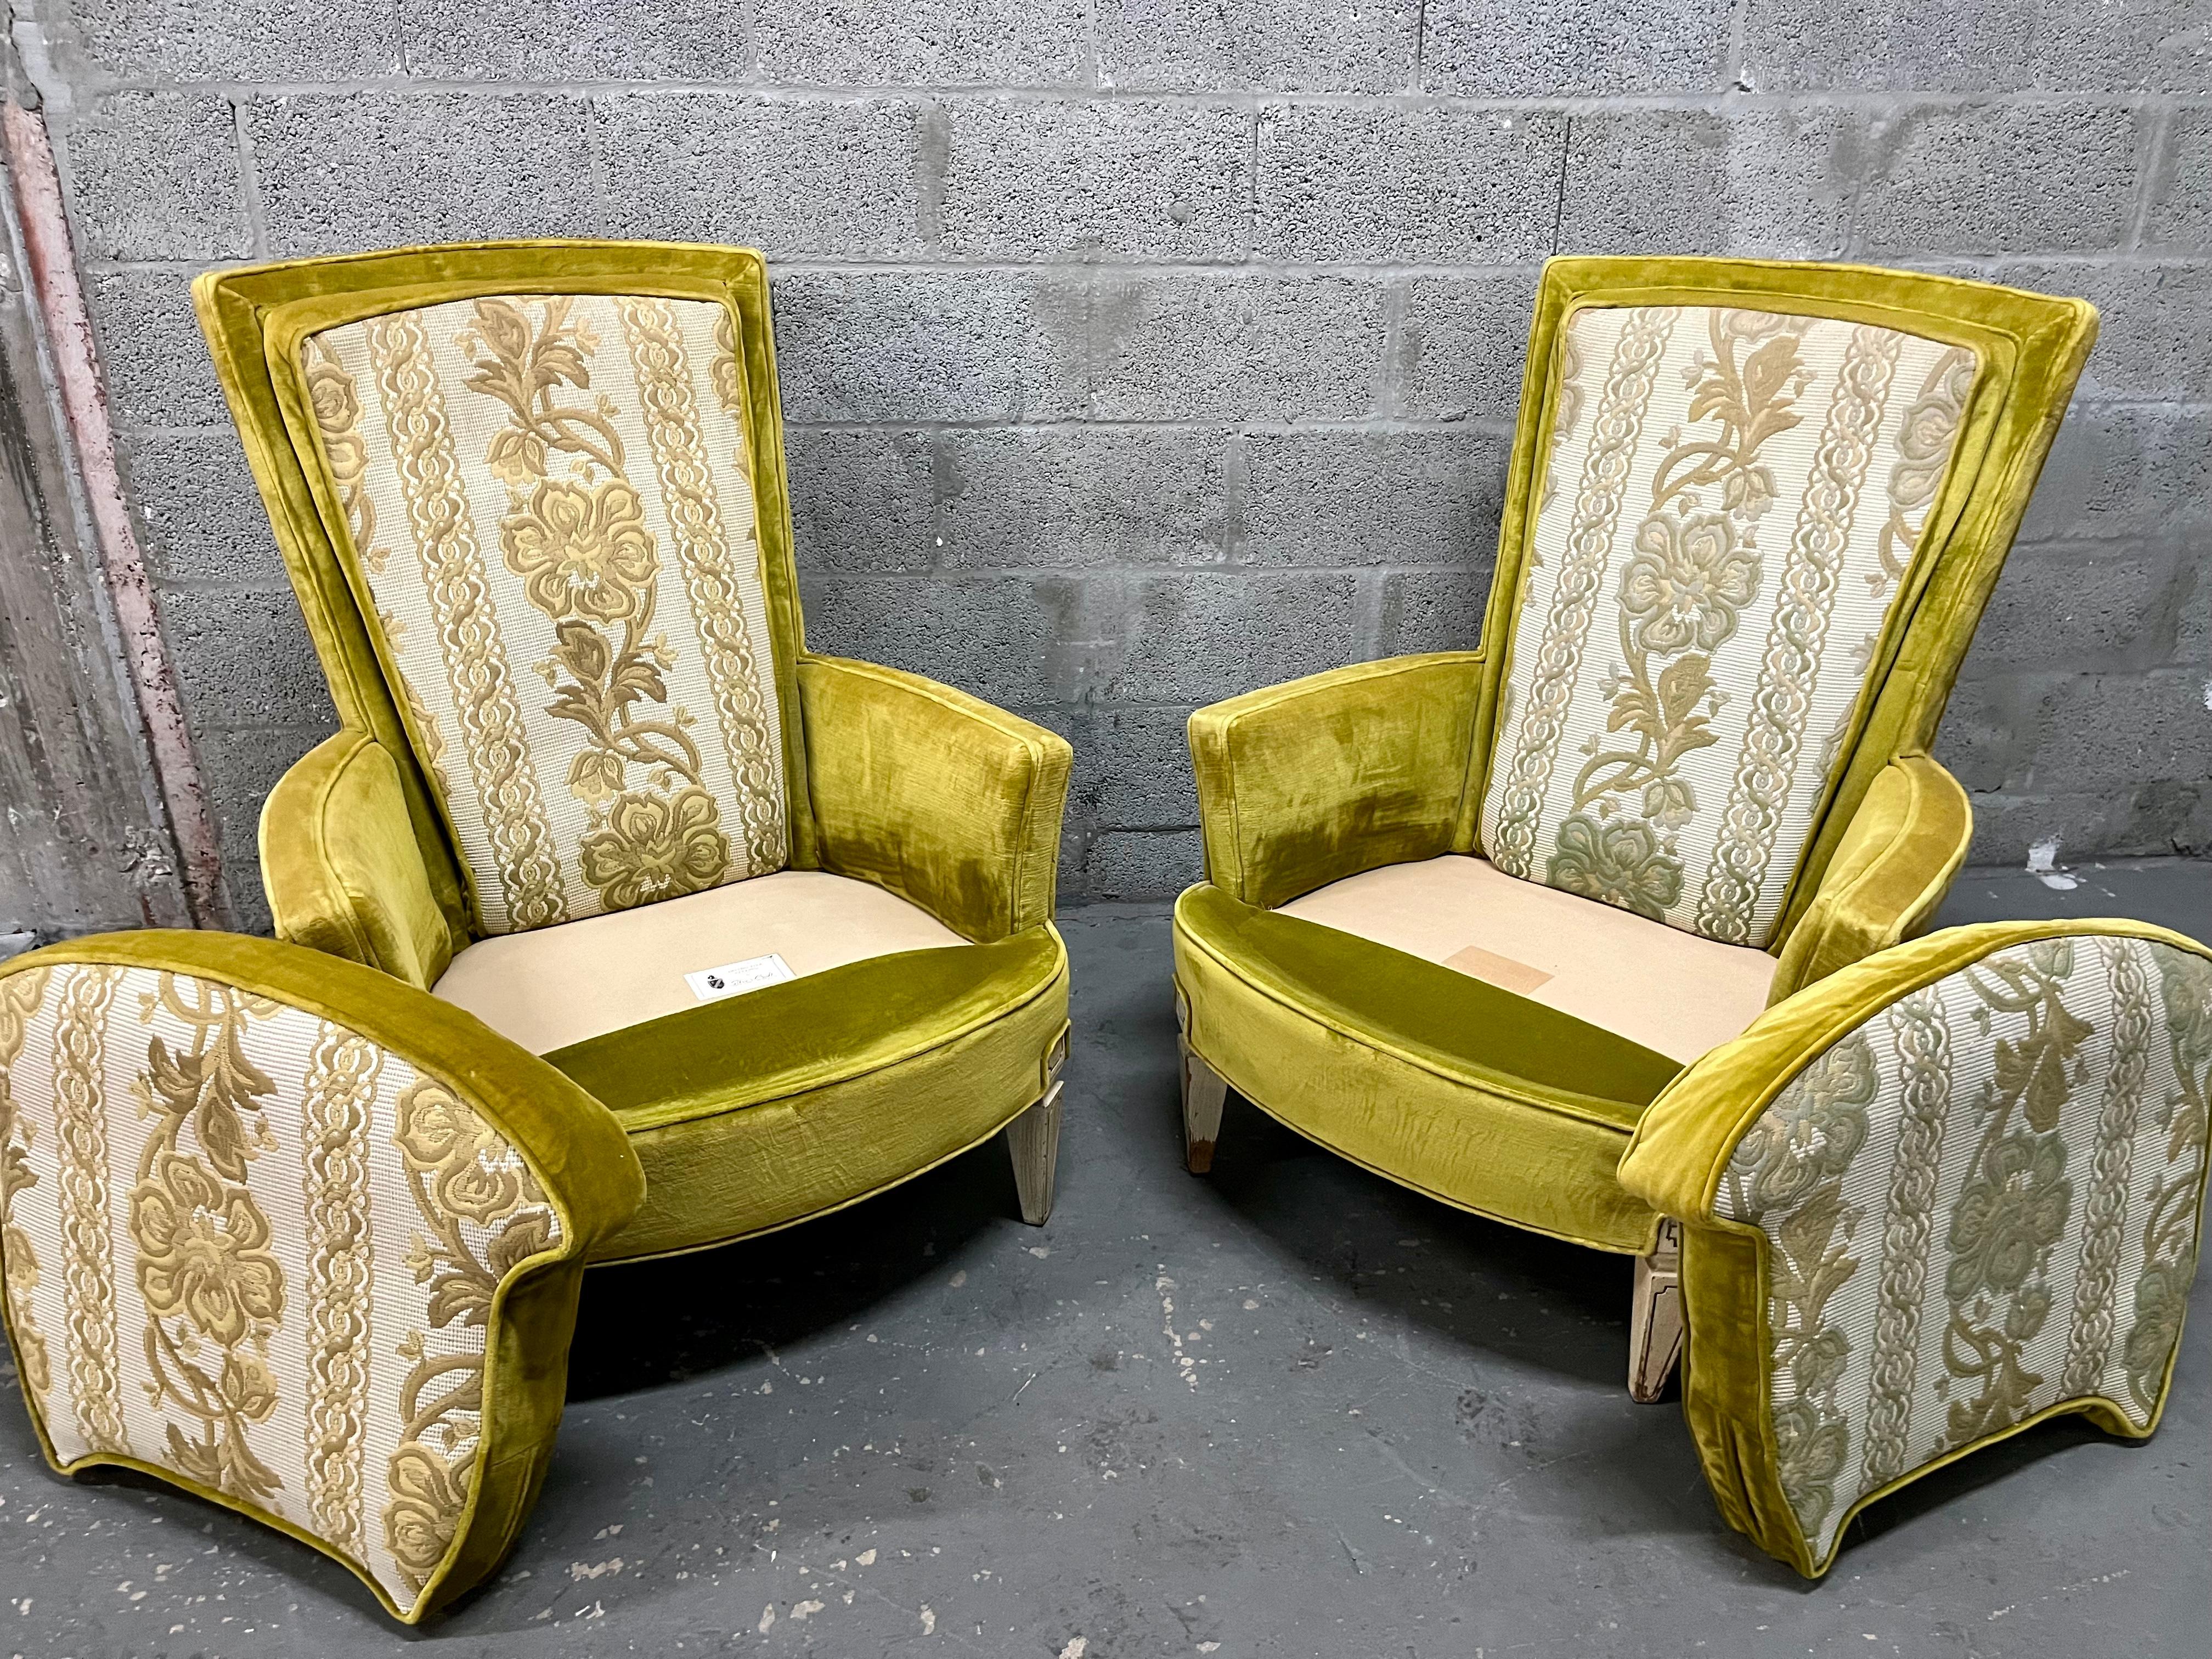 A Pair of Hollywood Regency Upholstered Lounge Chairs by Silver Craft. C. 1960s For Sale 2